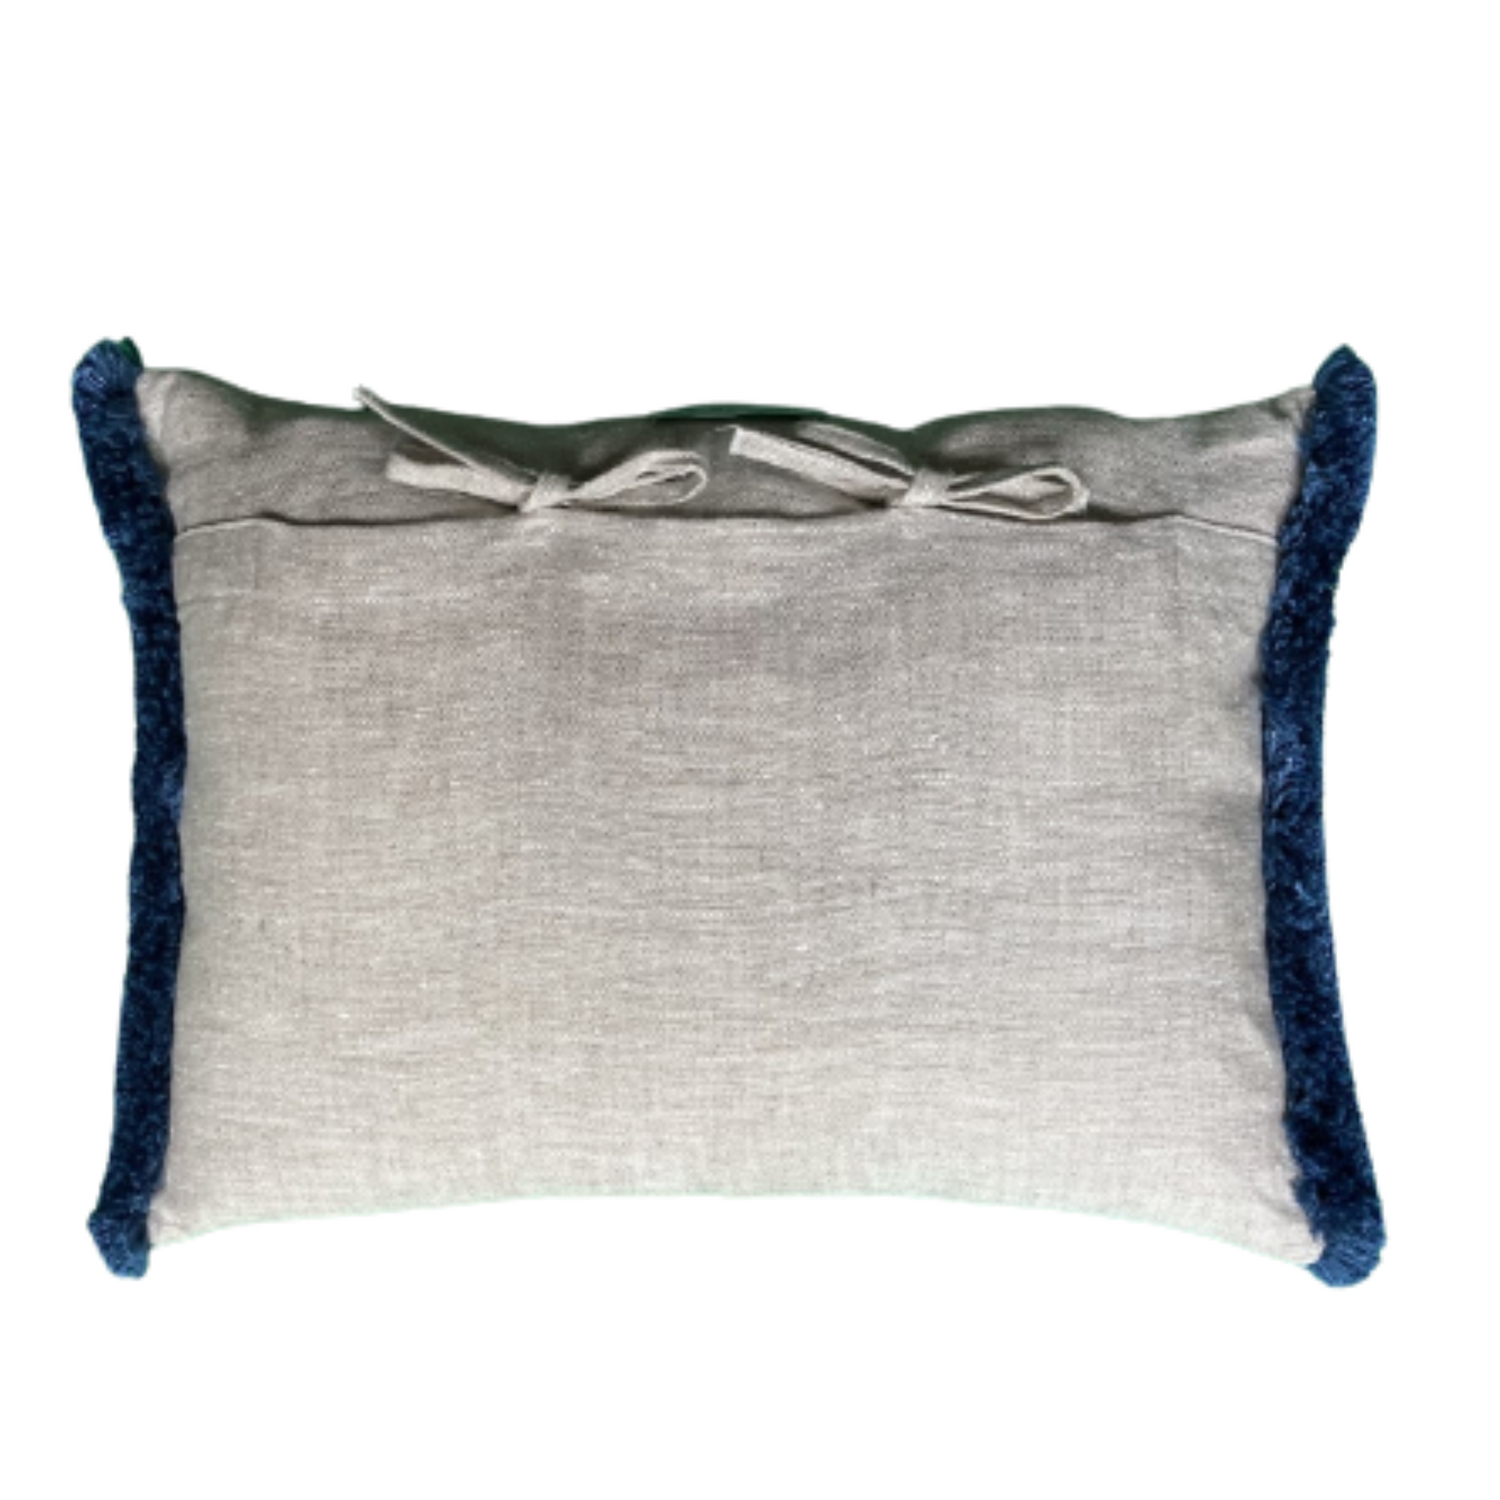 Odell Blue and Grey Ikat Lumbar 13 X 17 Rectangle Designer Pillow with Down Feather Insert